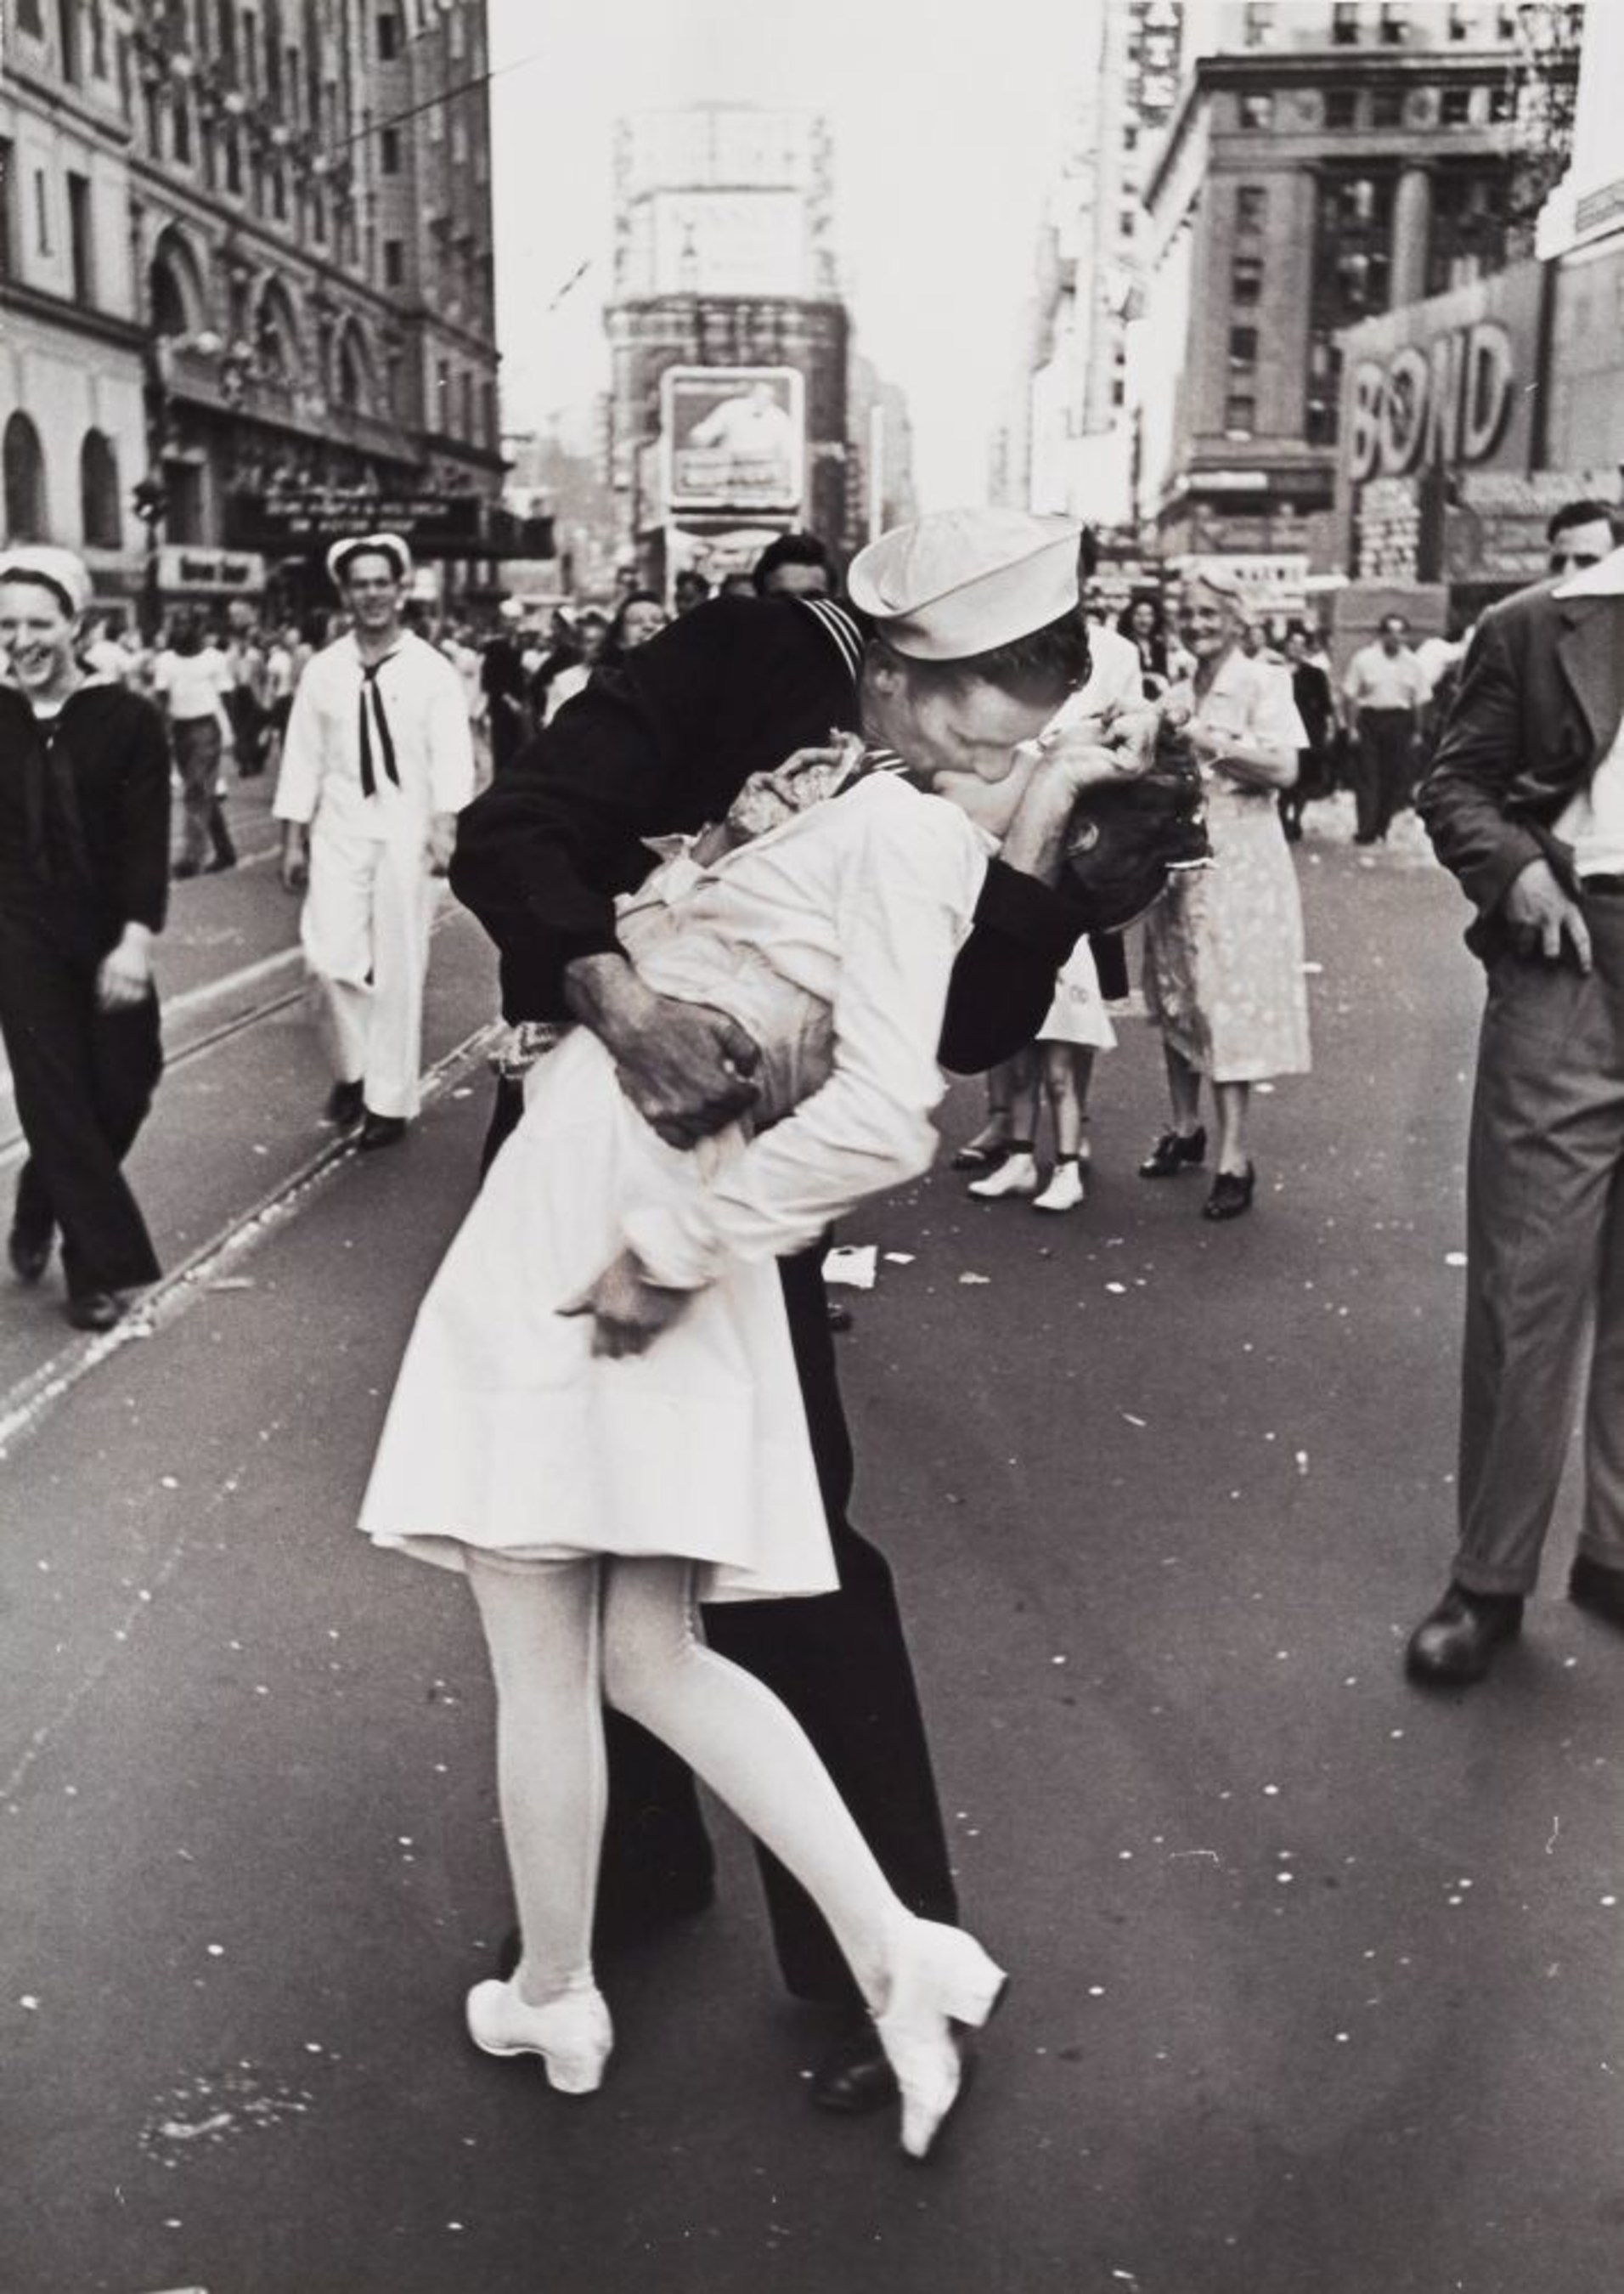 Alfred Eisenstaedt (1898-1995) "V-J Day Kiss in Times Square", New York 1945 (C) WestLicht Photographica Auction. (PRNewsFoto/WestLicht Photographica Auction)